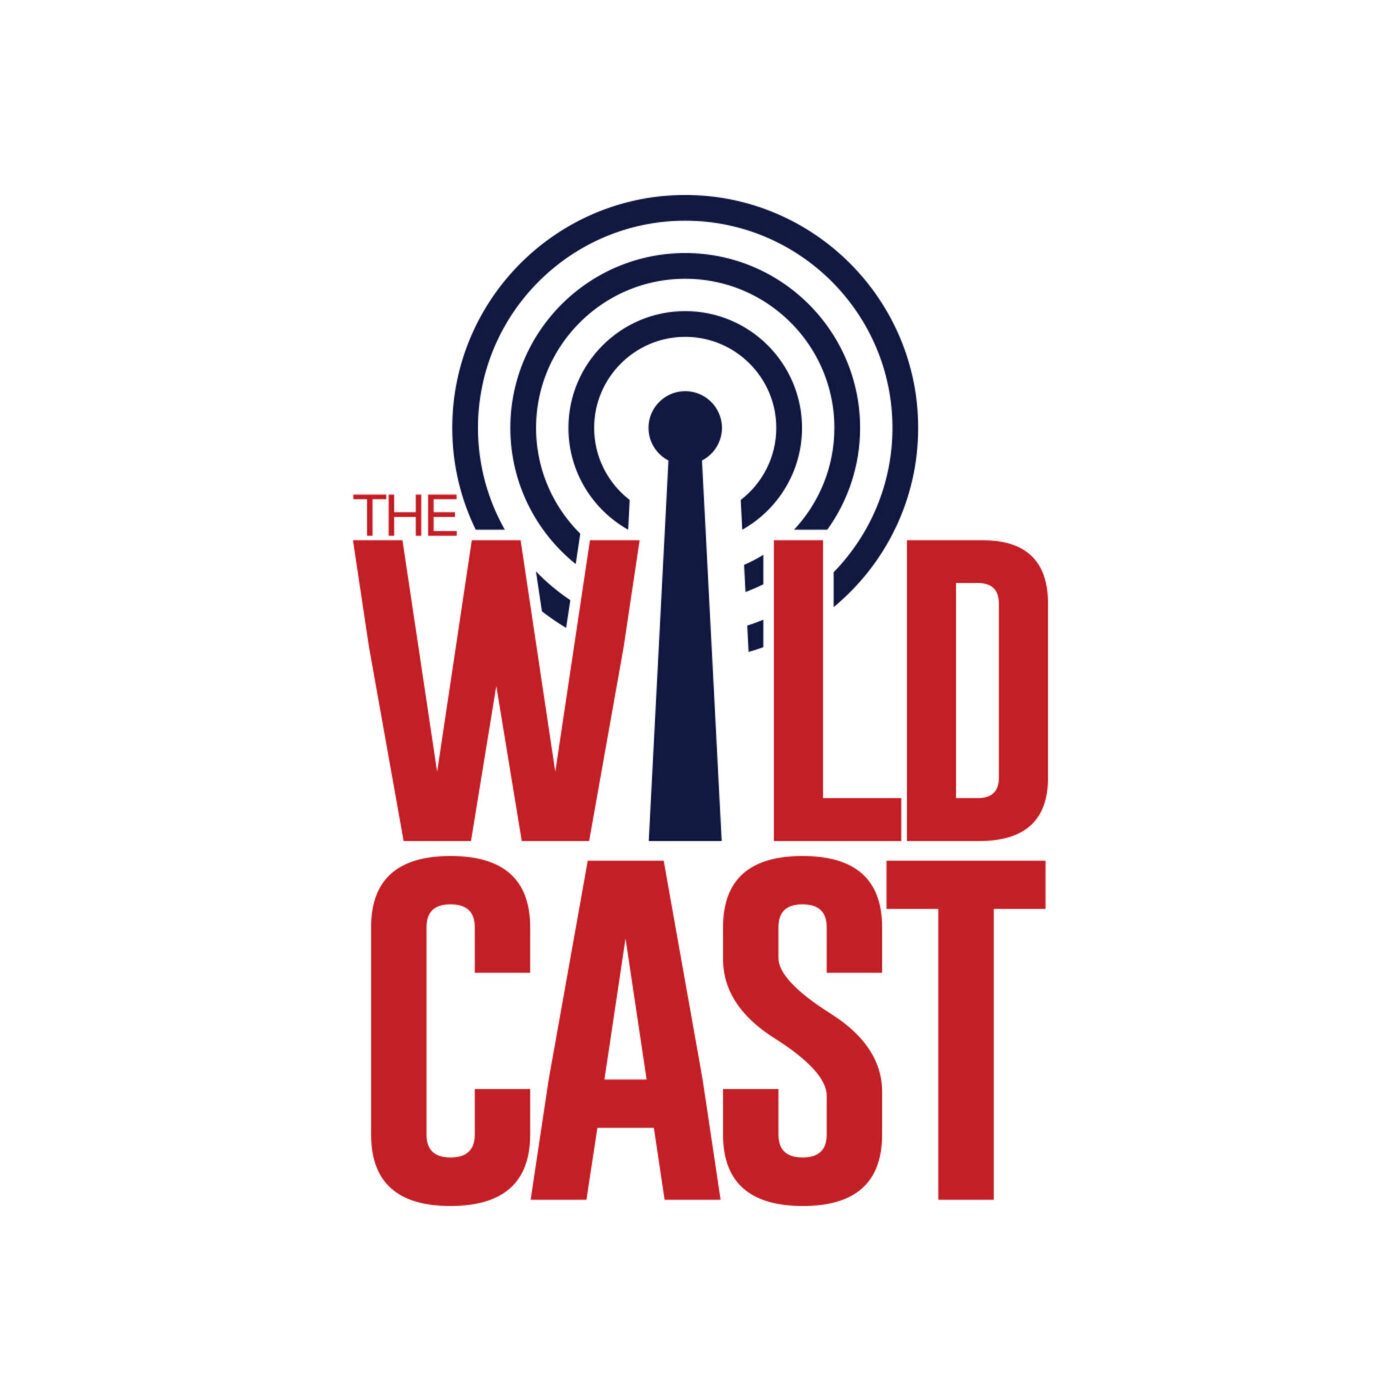 The Wildcast, Episode 281: Former Chicago Bull Craig Hodges explains how cannabis helped his 'misery and pain'